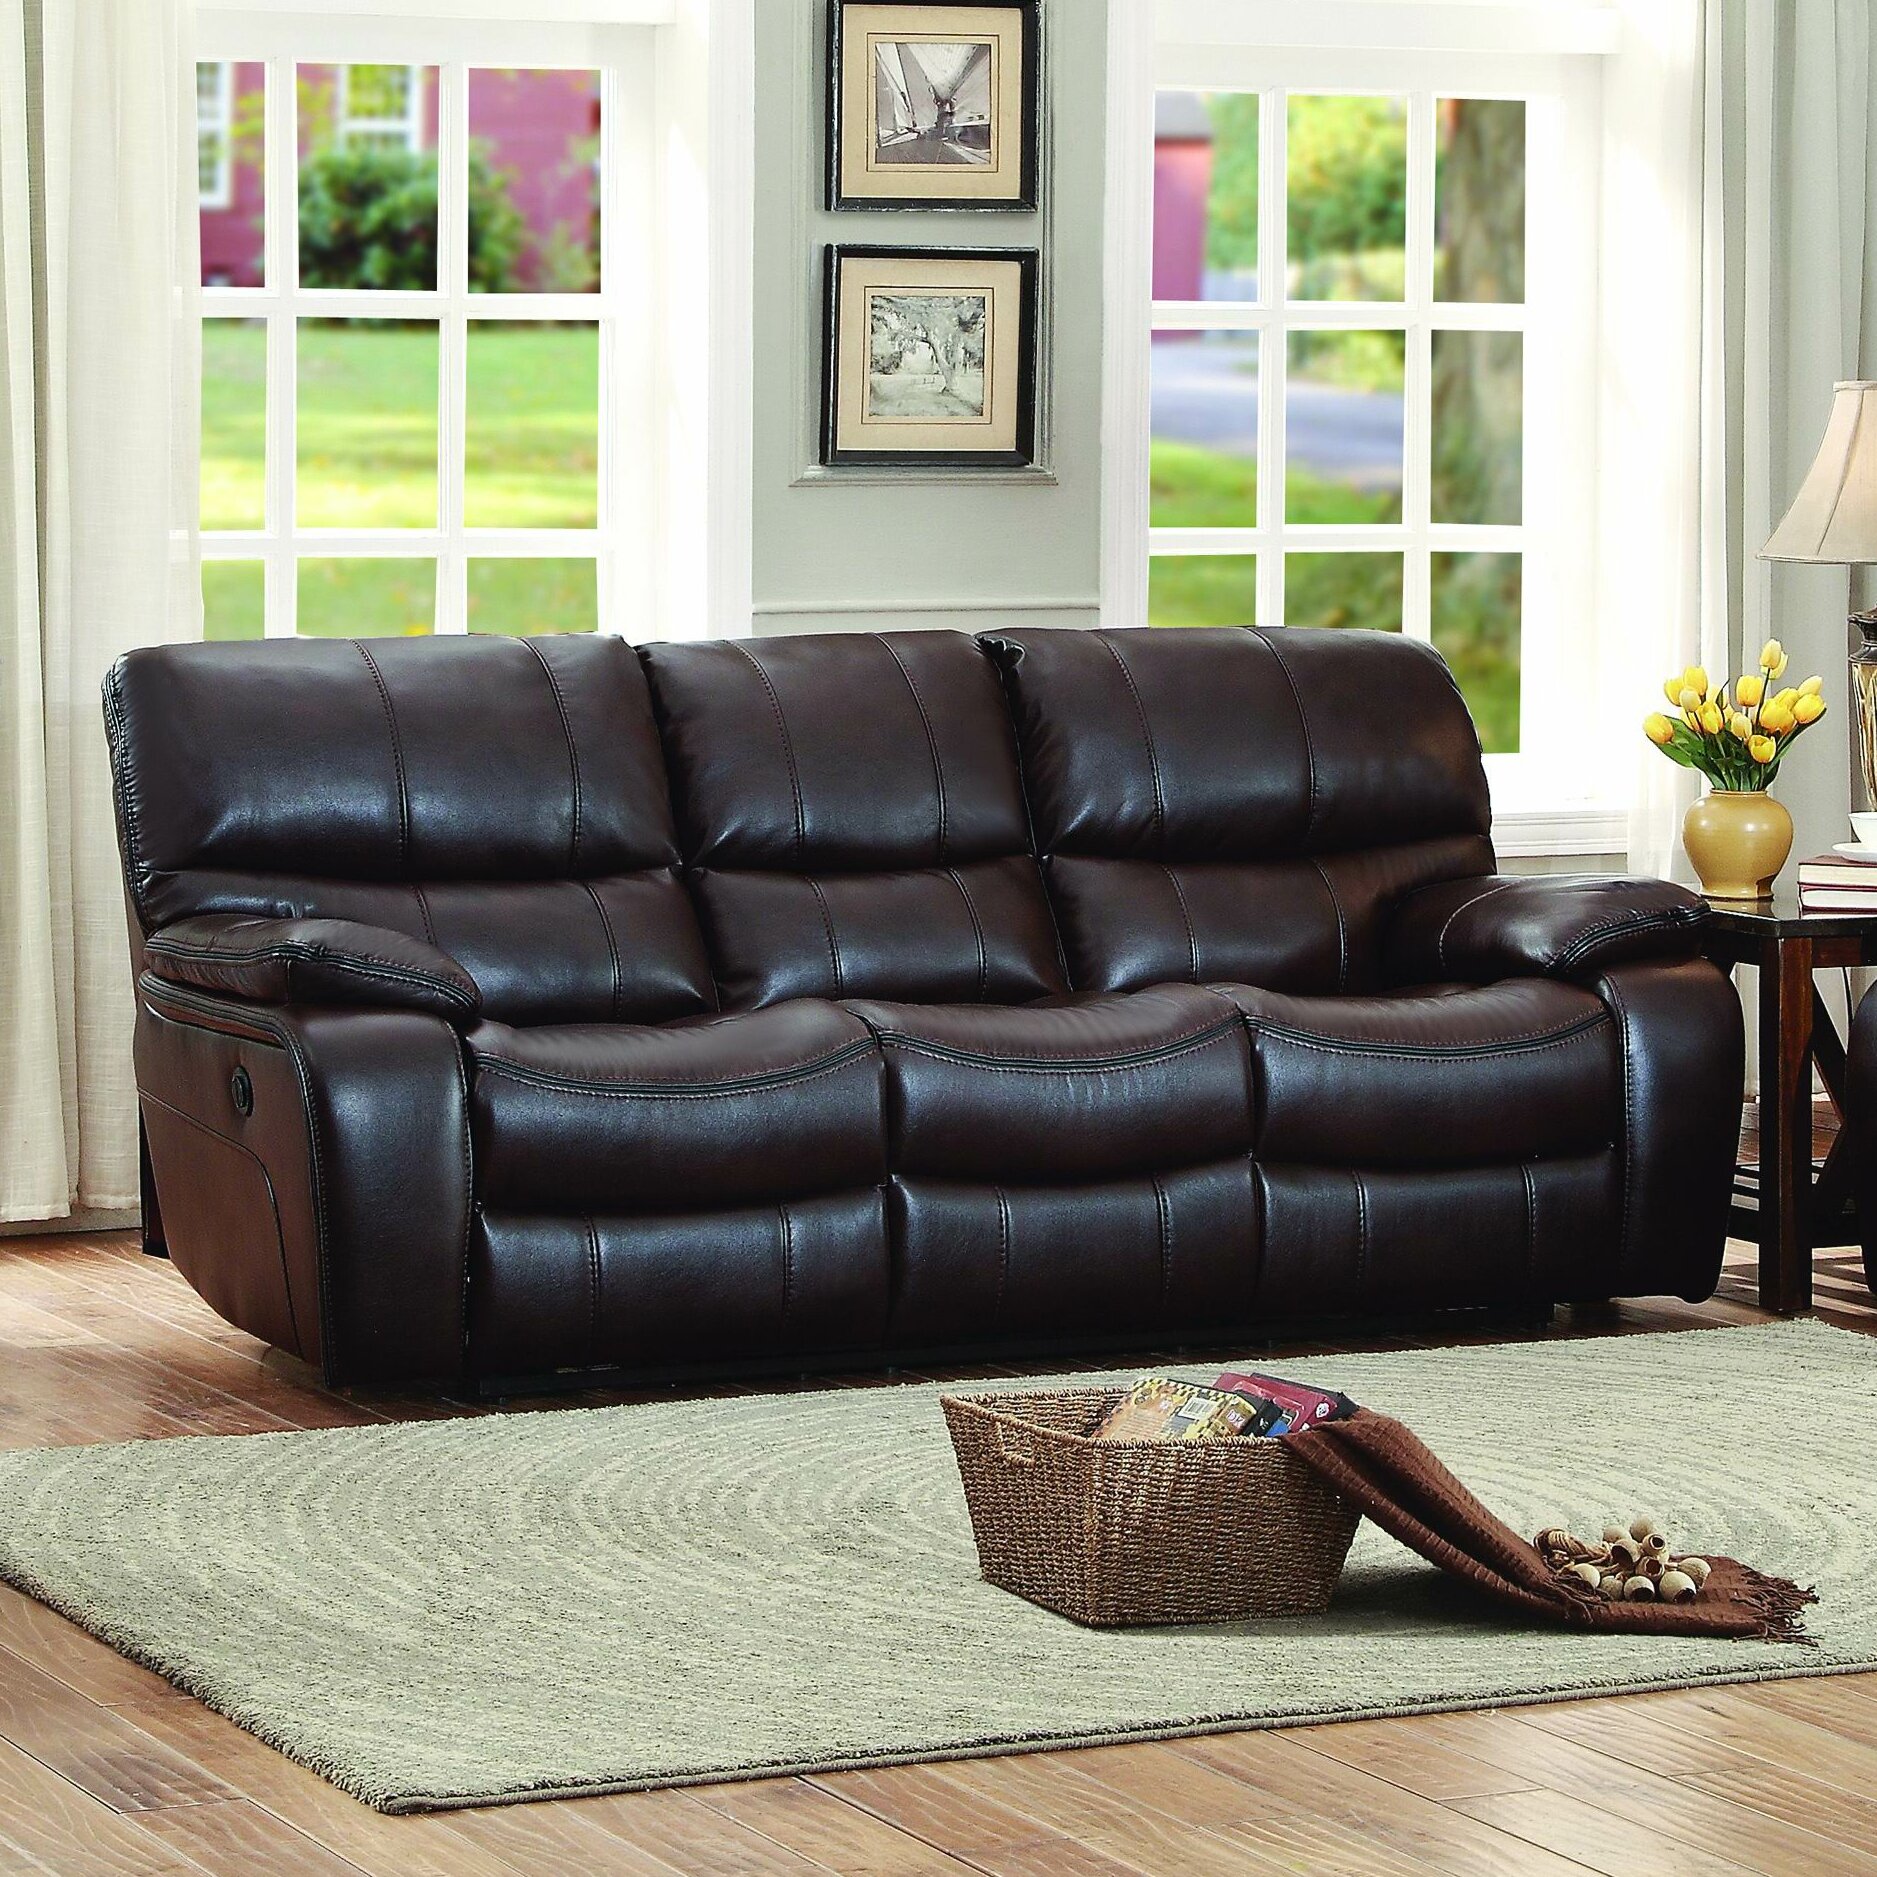 Ector 88” Faux Leather Pillow Top Arm Reclining Sofa